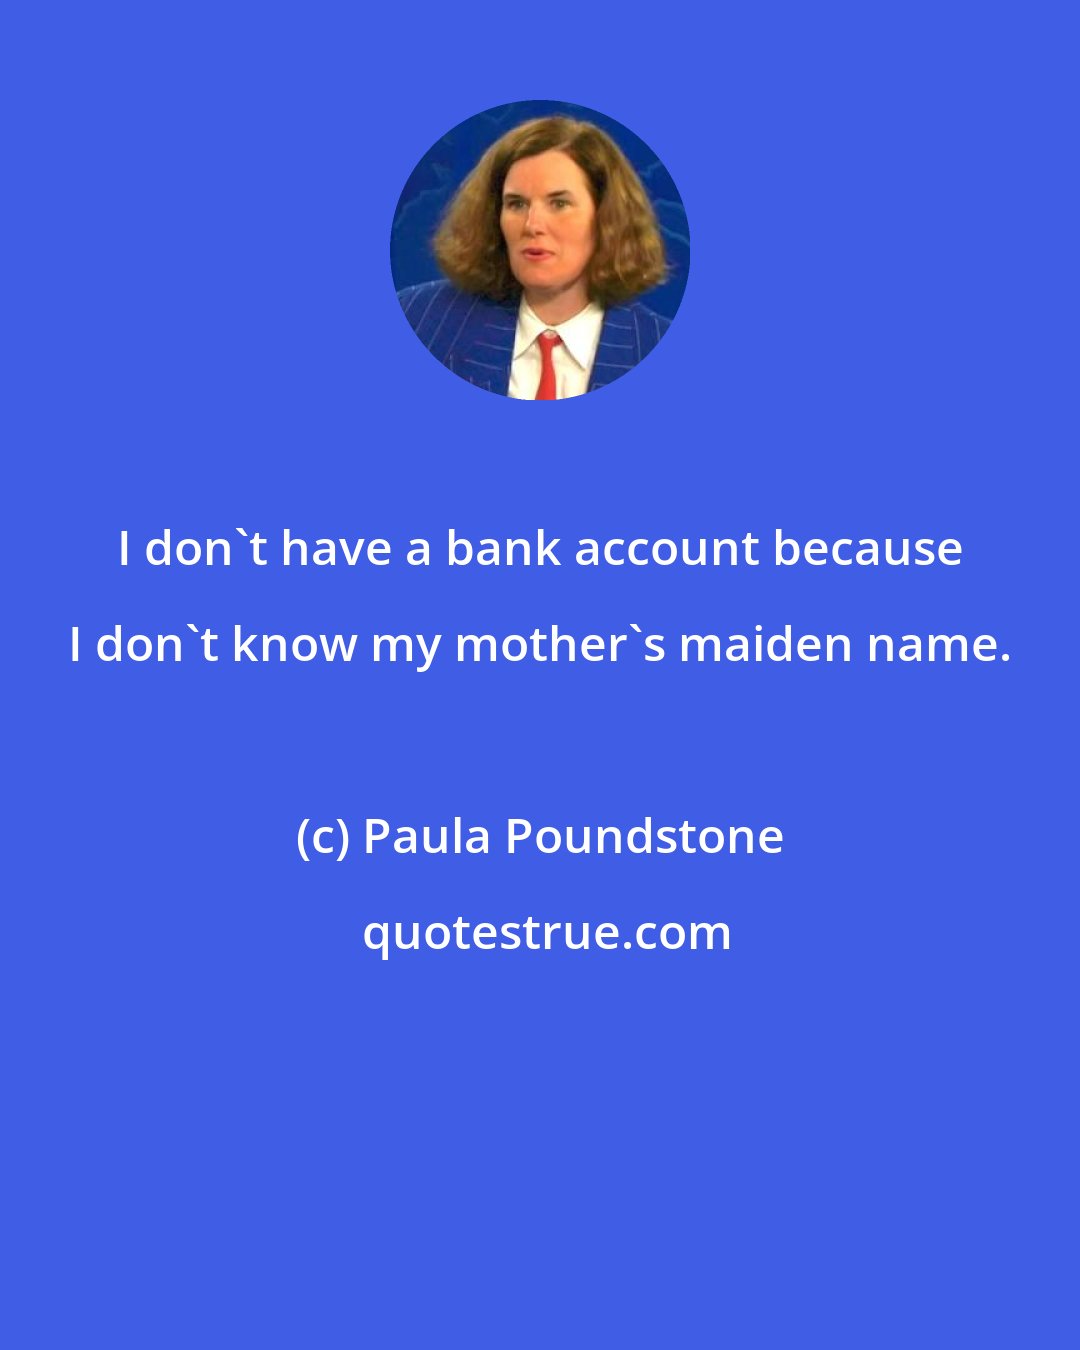 Paula Poundstone: I don't have a bank account because I don't know my mother's maiden name.